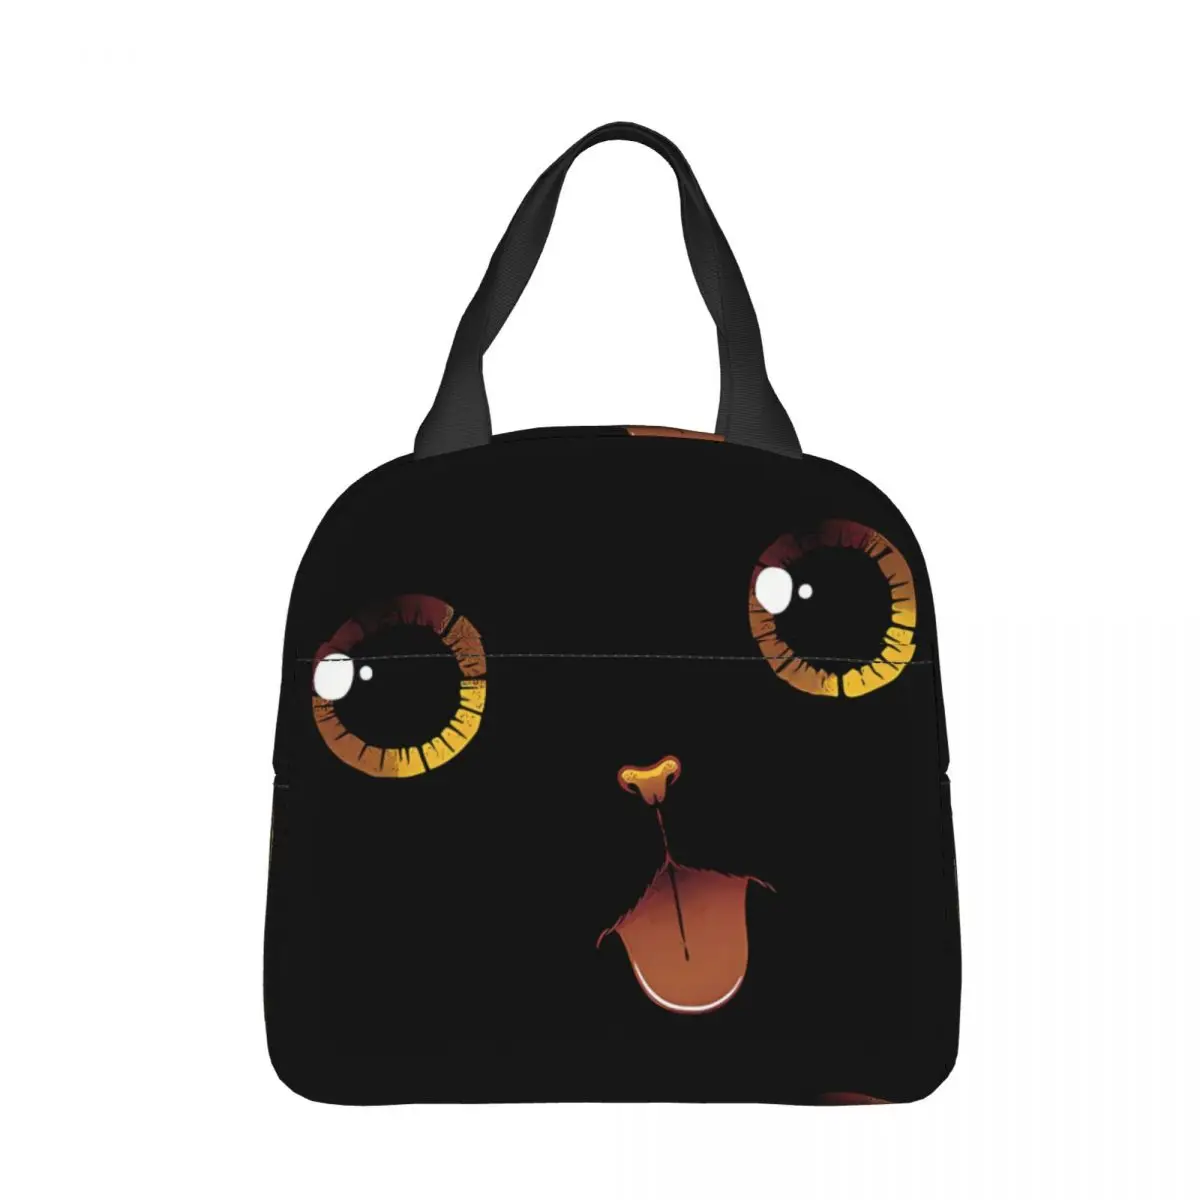 

Cute Black Cat Insulated lunch bag Catzilla Monsters Kitten Women Kids Cooler Bag Thermal Portable Lunch Box Ice Pack Tote